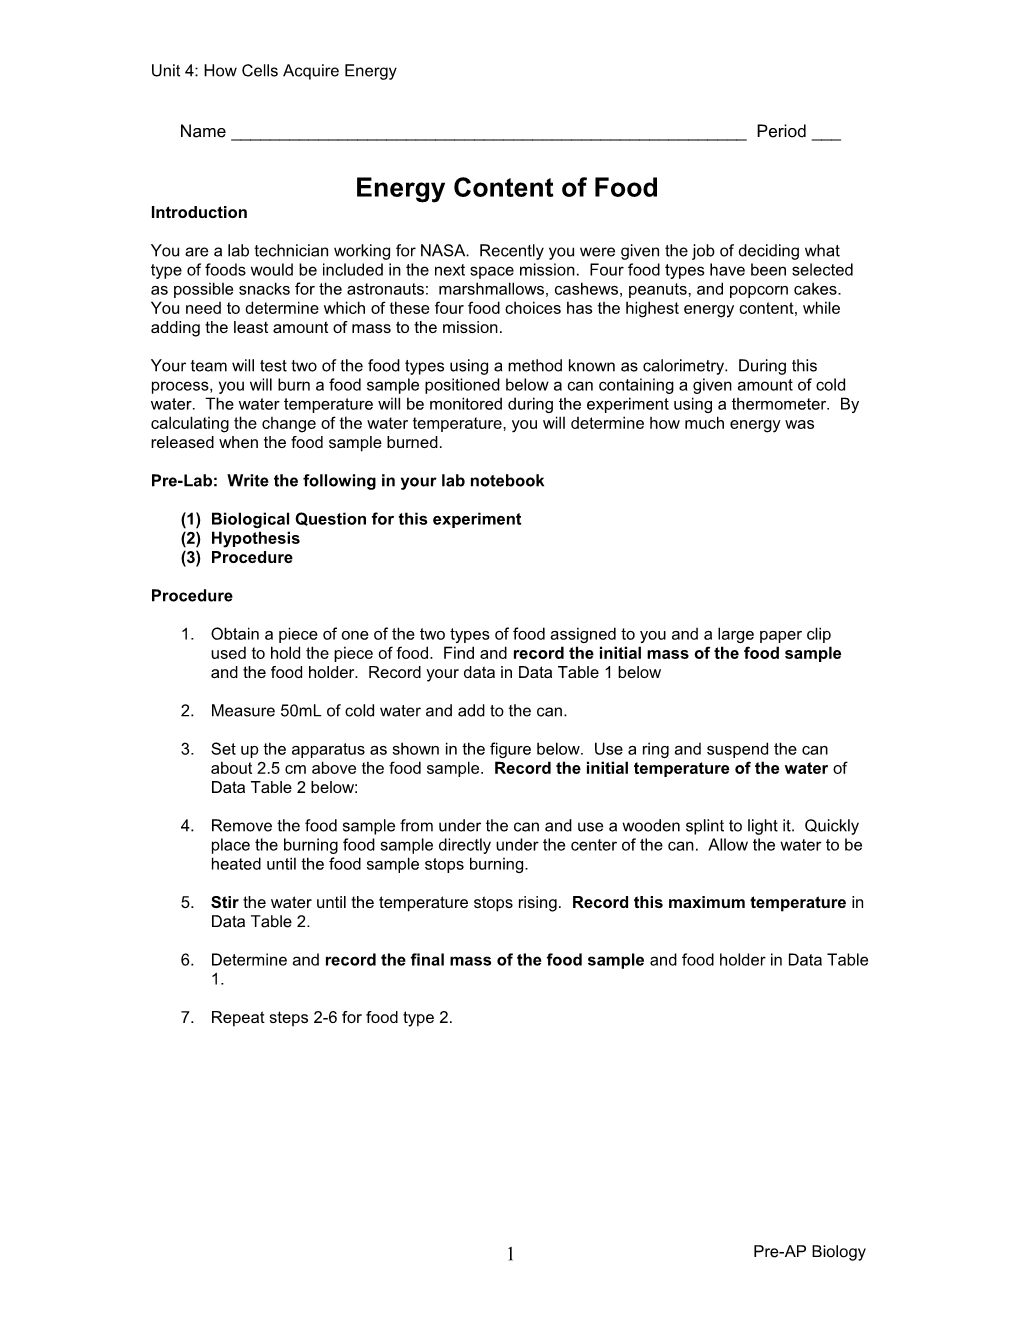 Energy Content of Foods